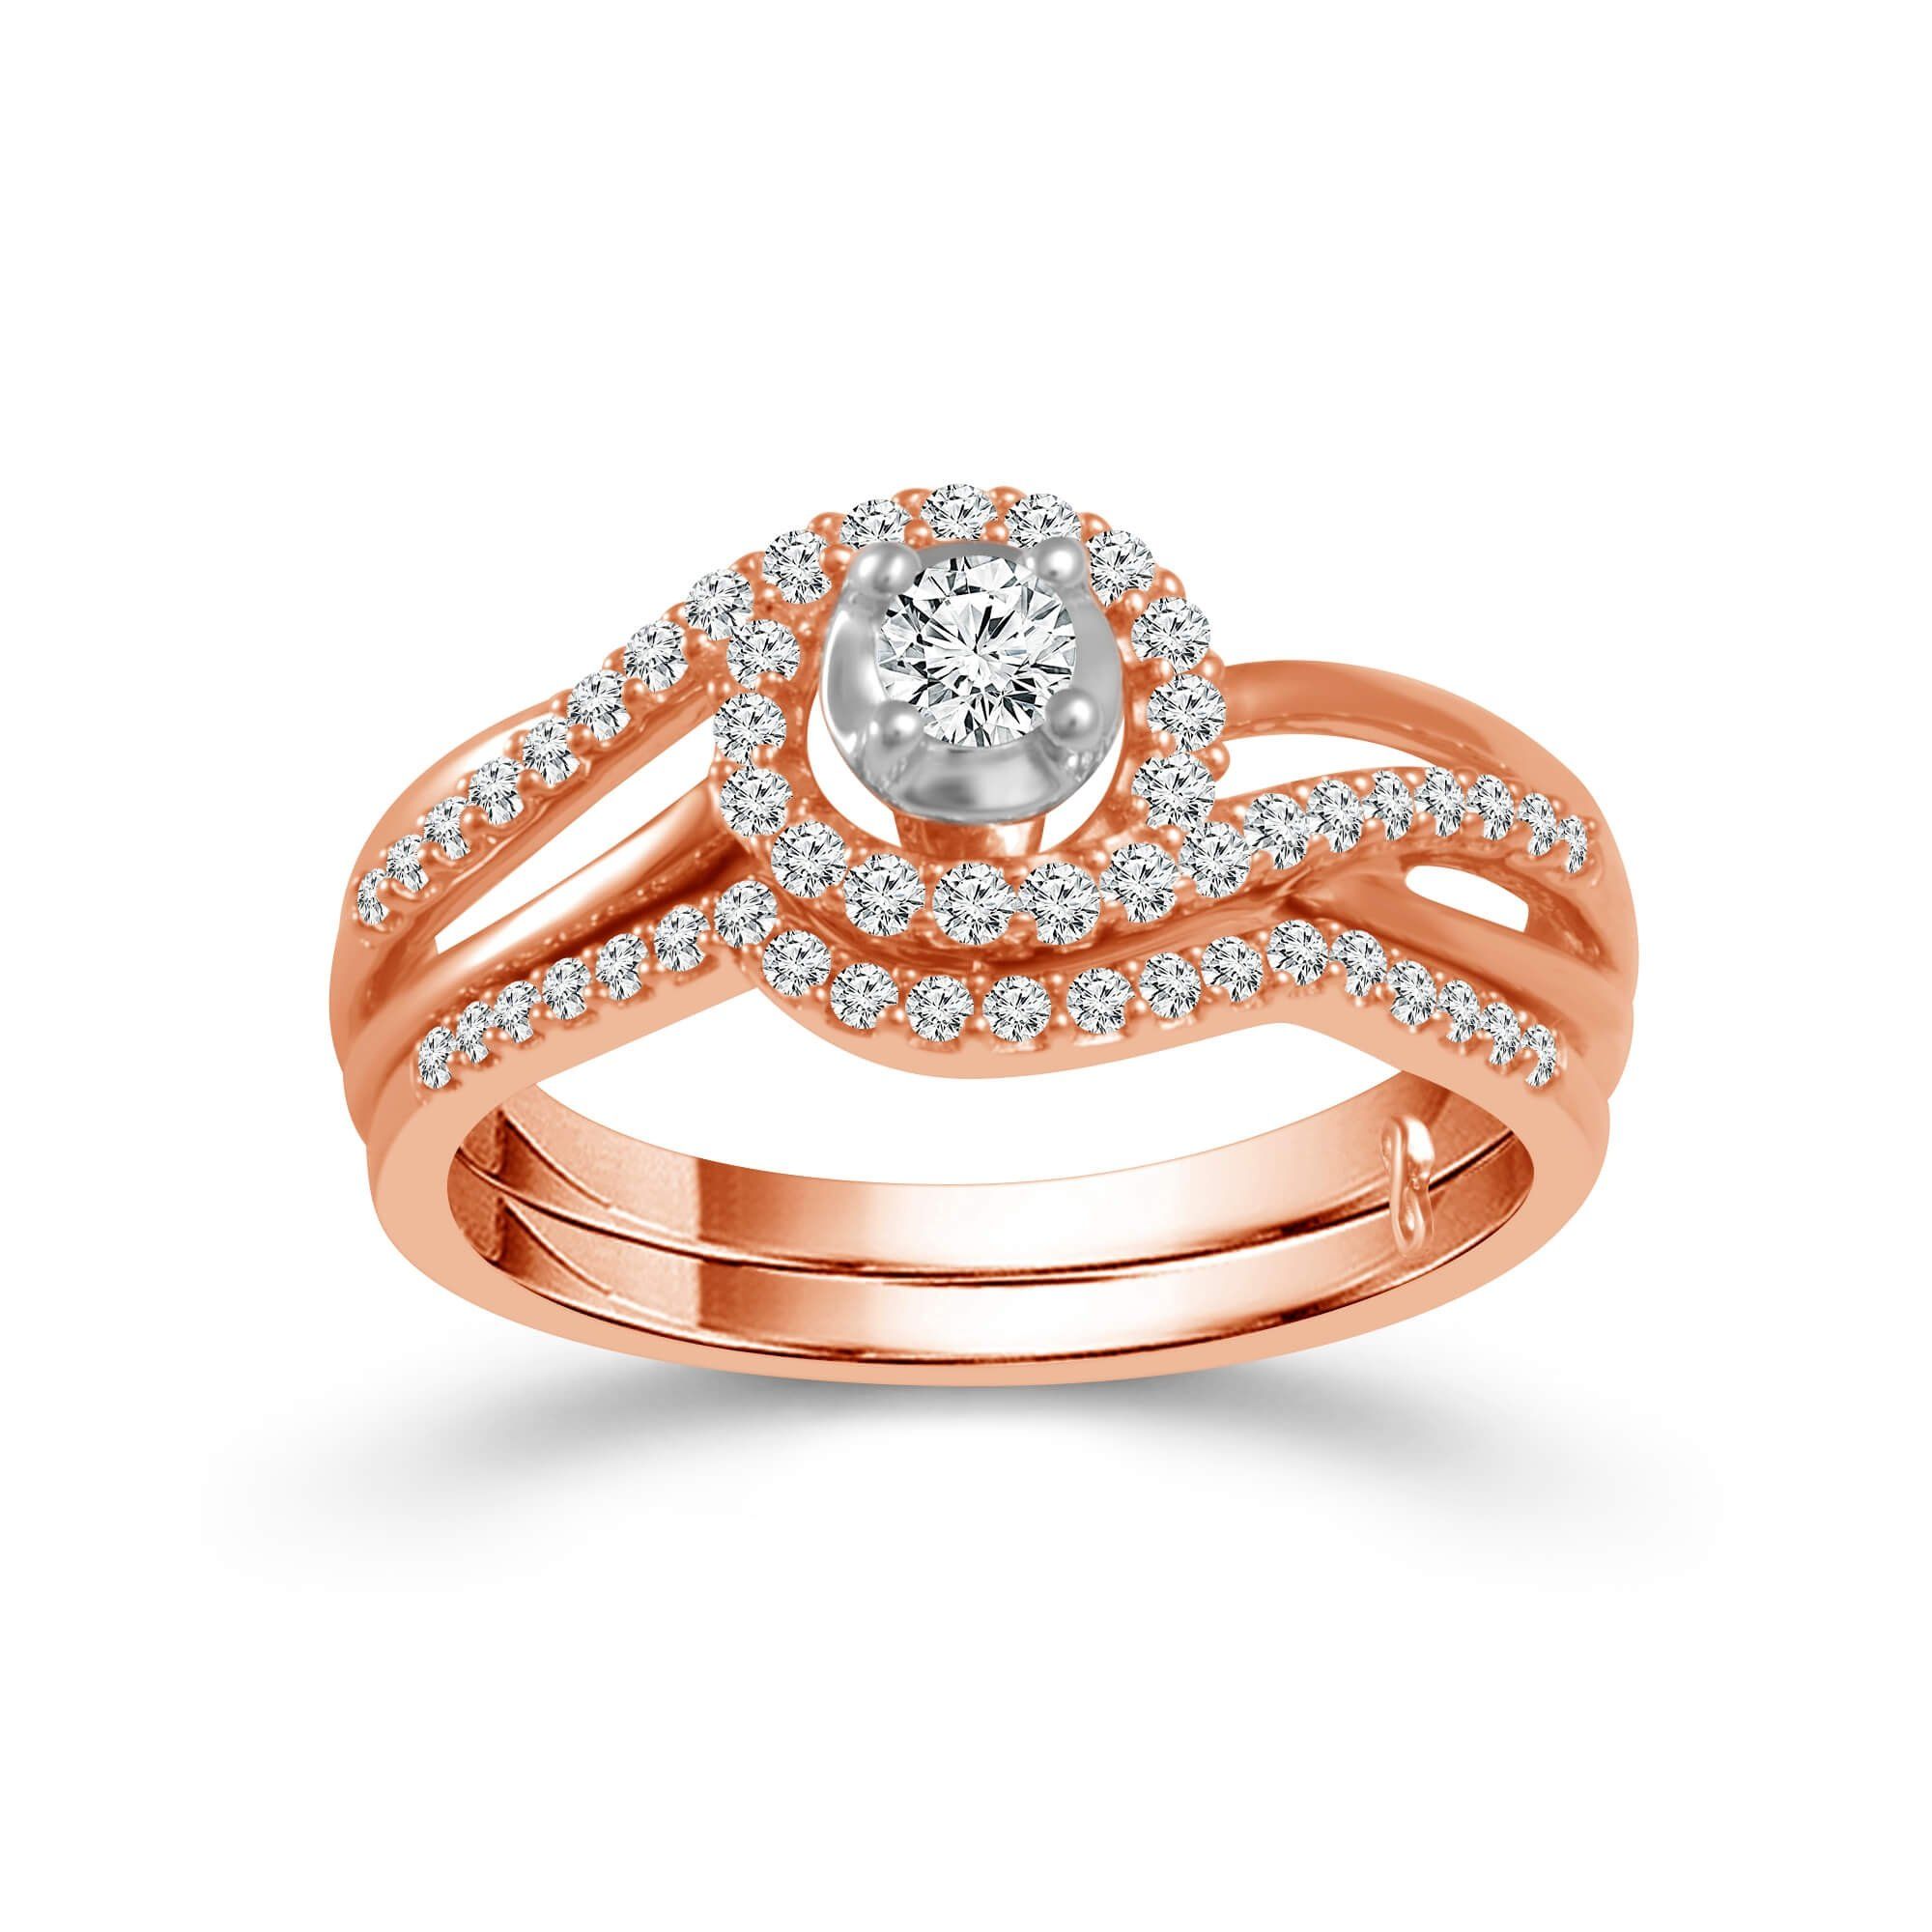 Rose Gold Halo Style Diamond Engagement Ring And Wedding With Best And Newest Princess Cut Single Diamond Wedding Bands In Rose Gold (View 21 of 25)